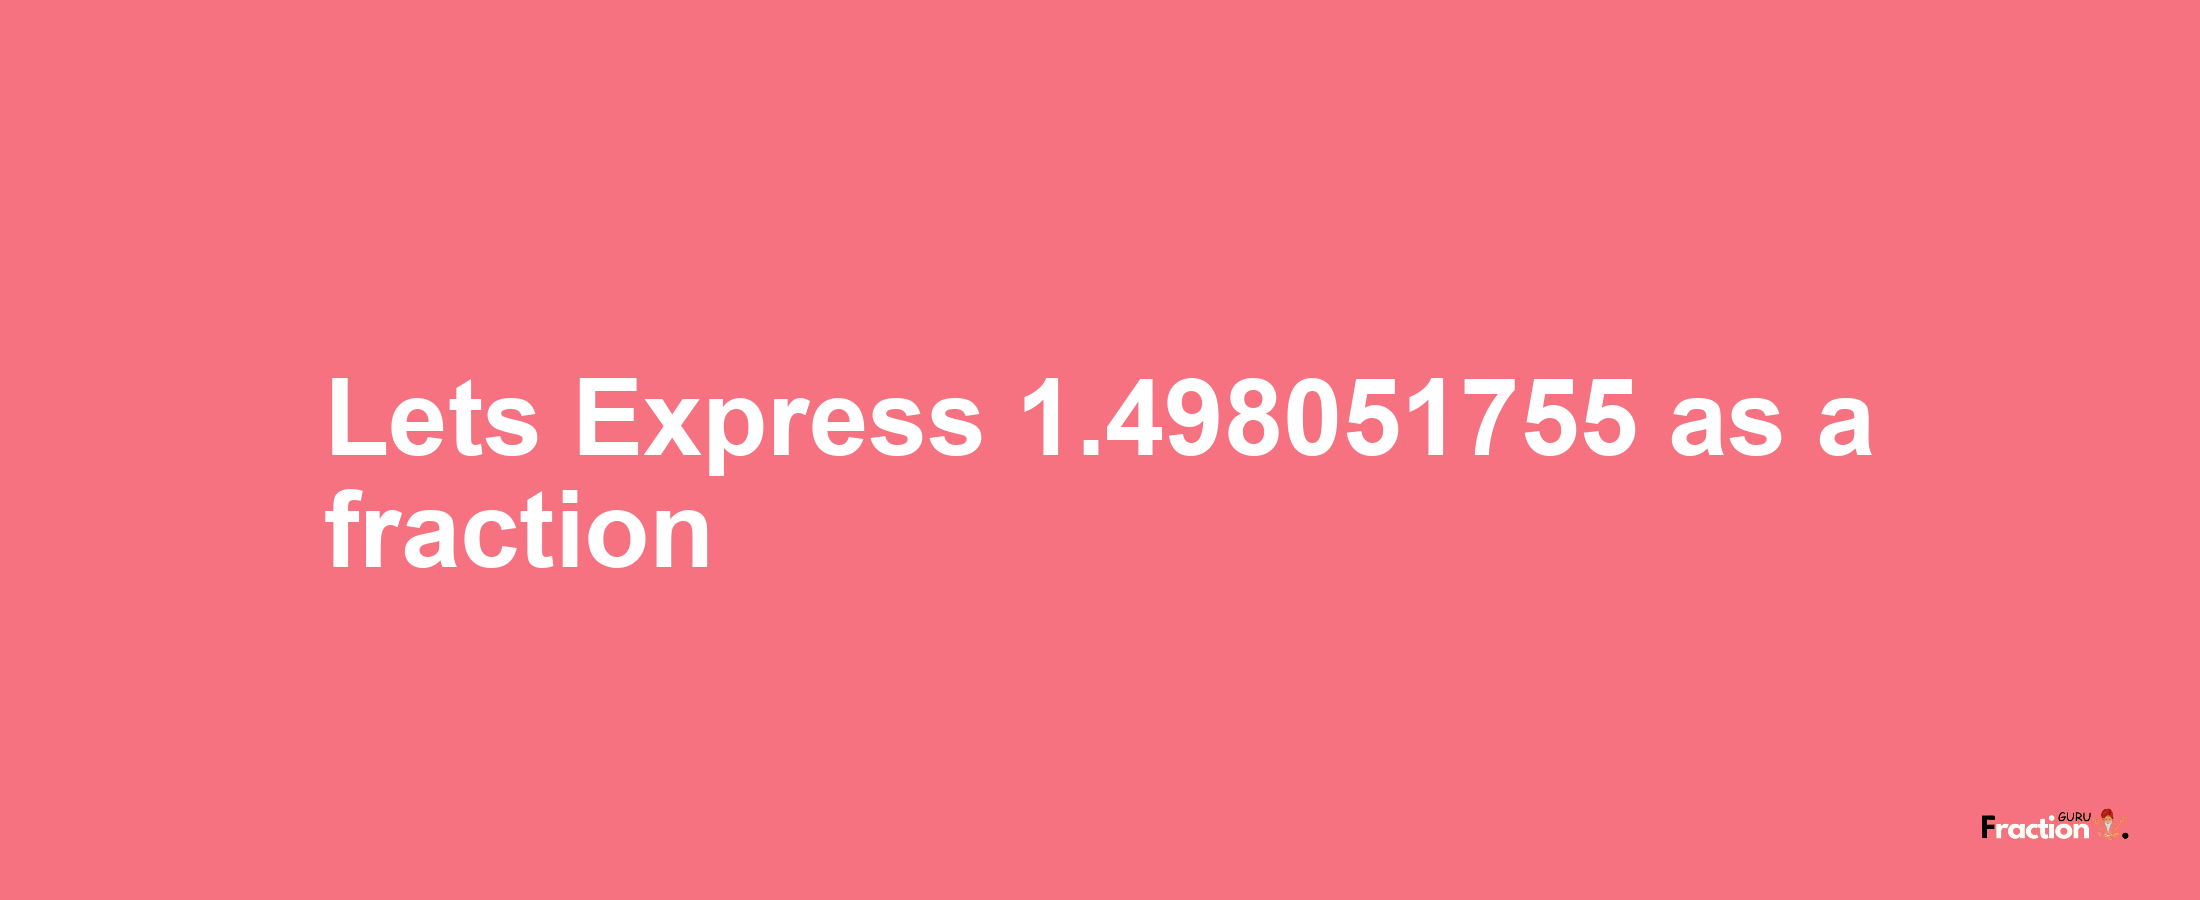 Lets Express 1.498051755 as afraction